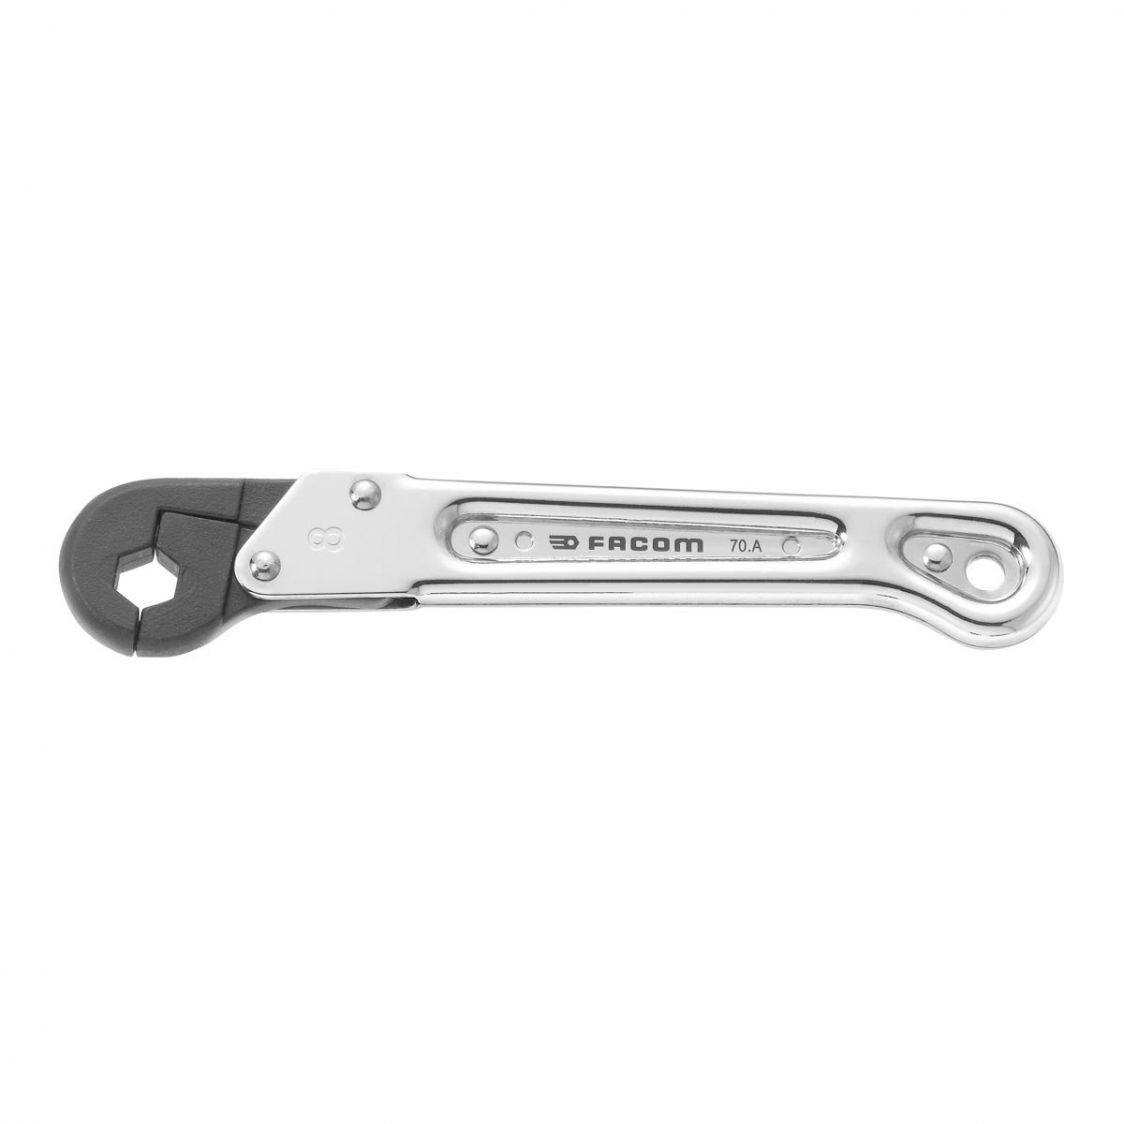 FACOM 70A.30 - 30mm Metric Ratchet Flare Nut Spanner